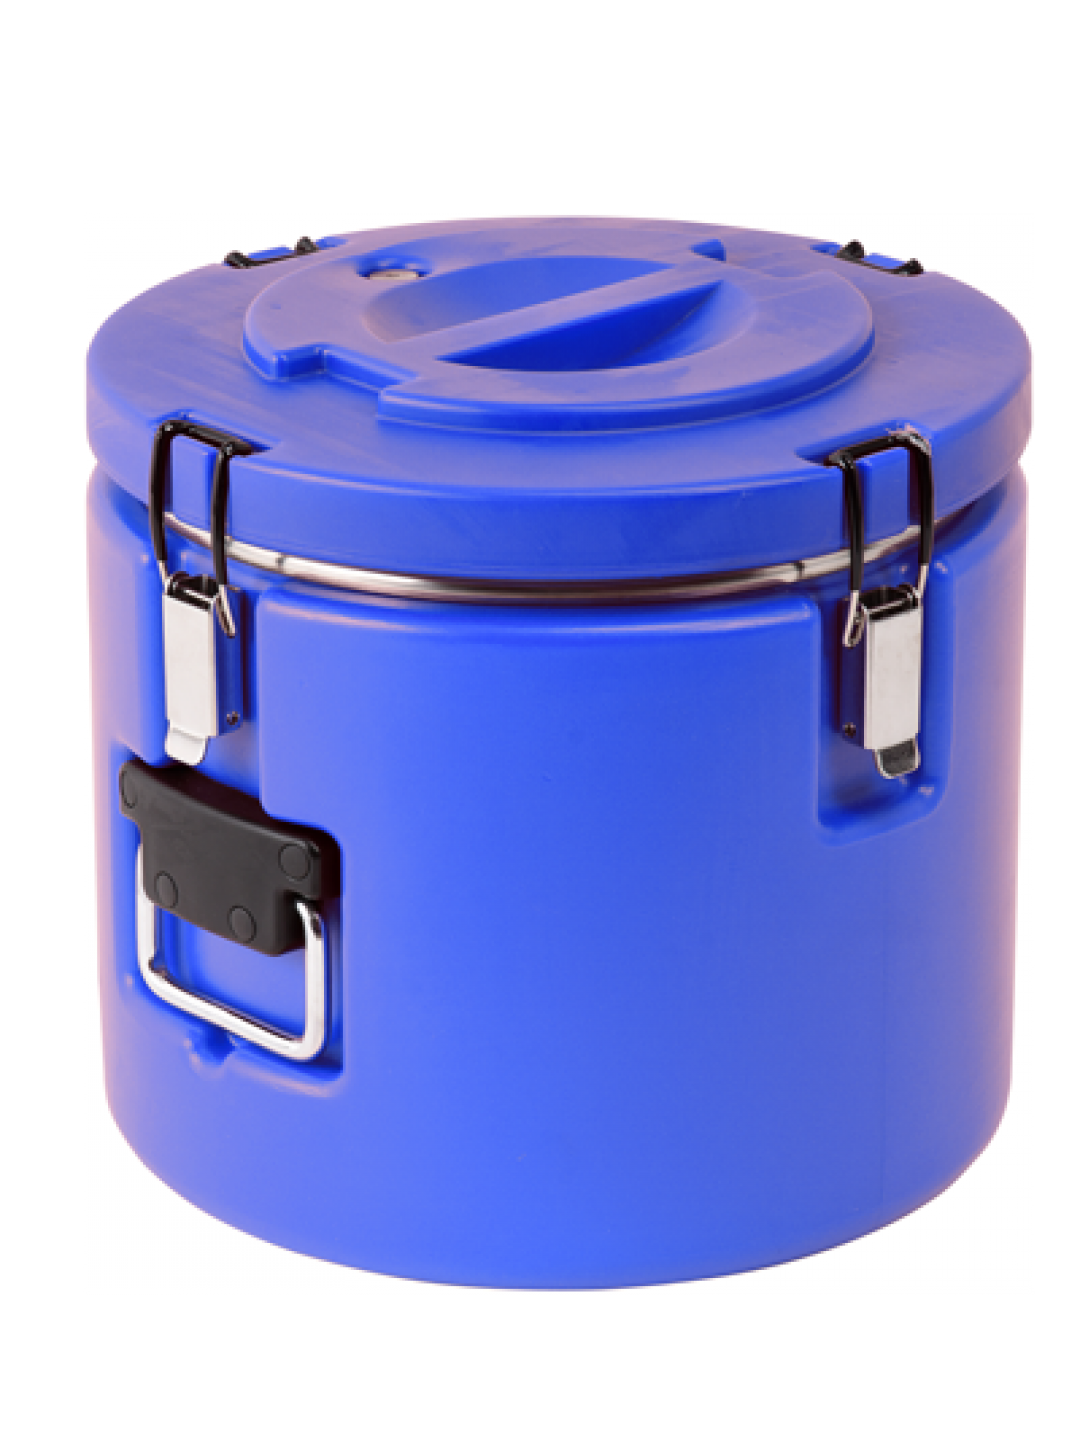 Thermo food transfer tank ASED, 28 liters BLUE, RED